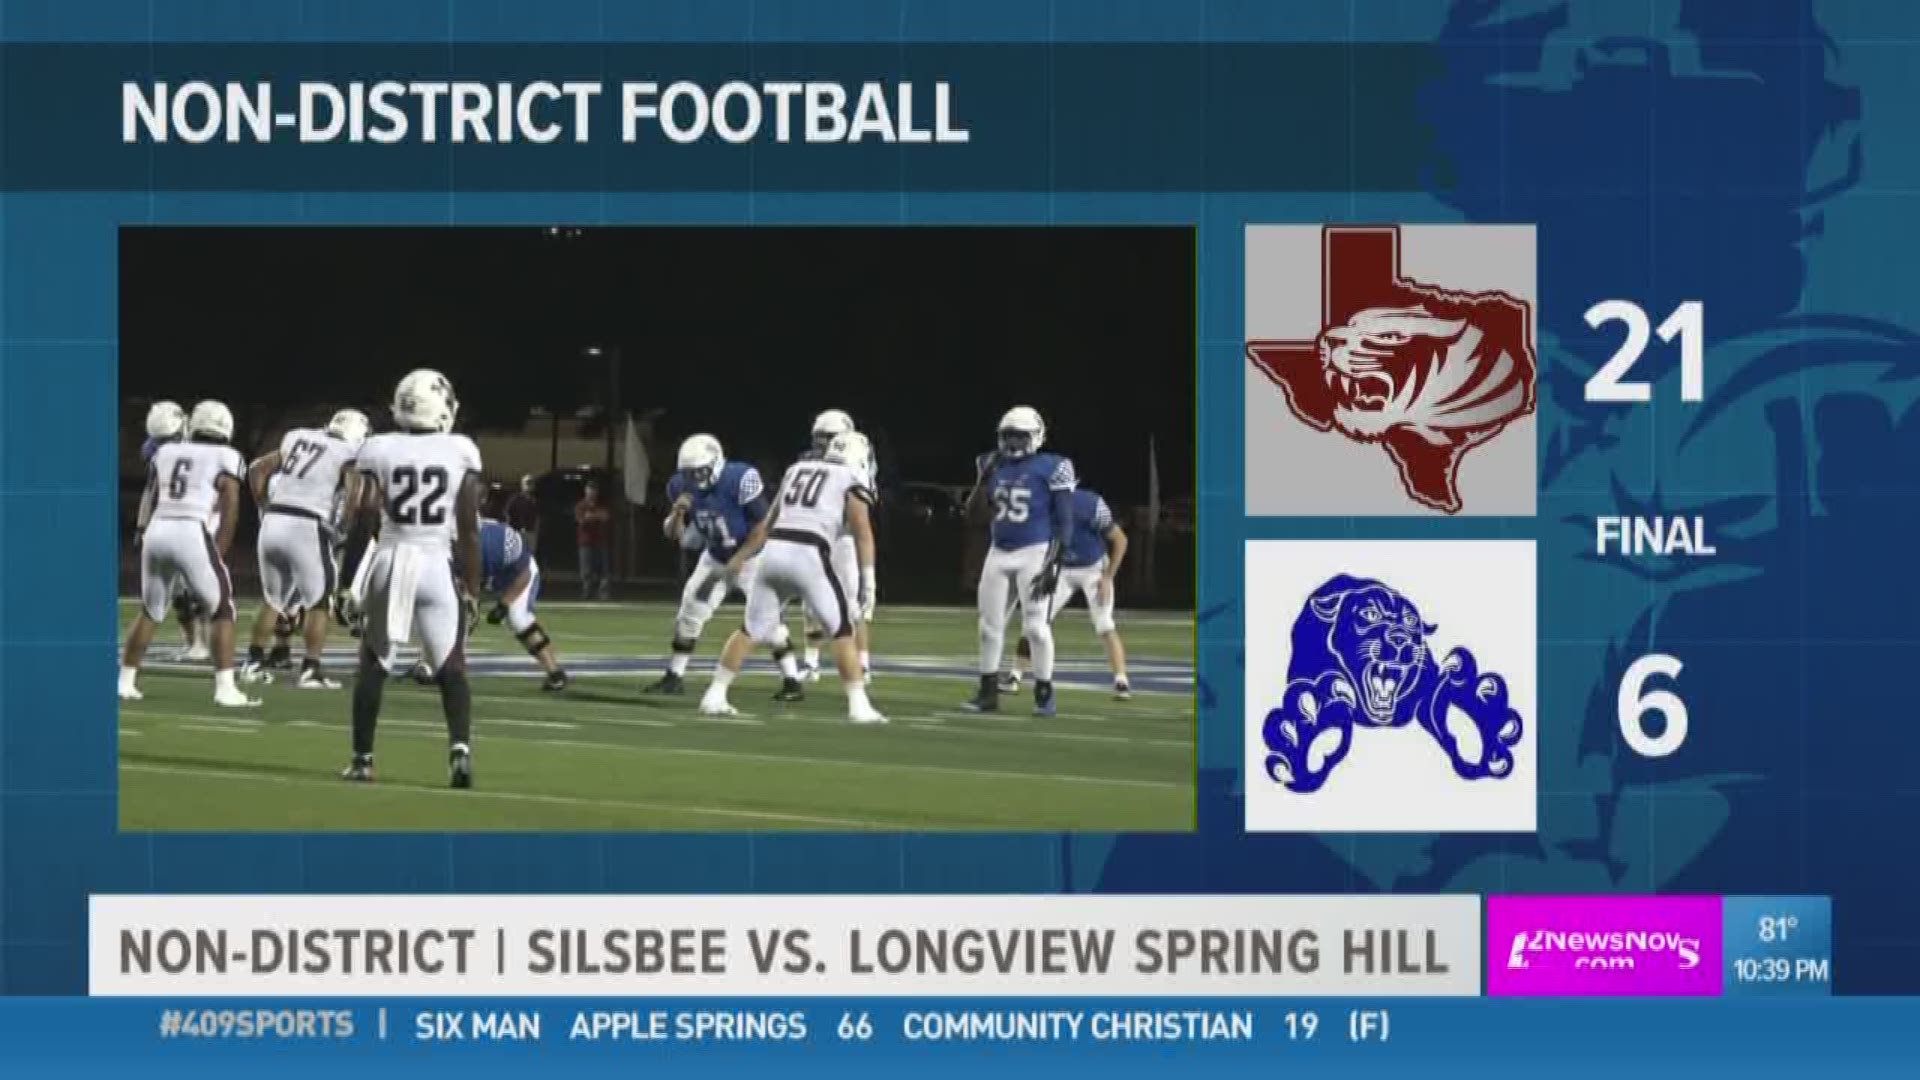 WEEK 6: Silsbee High School scores a win over Spring Hill 21 -6